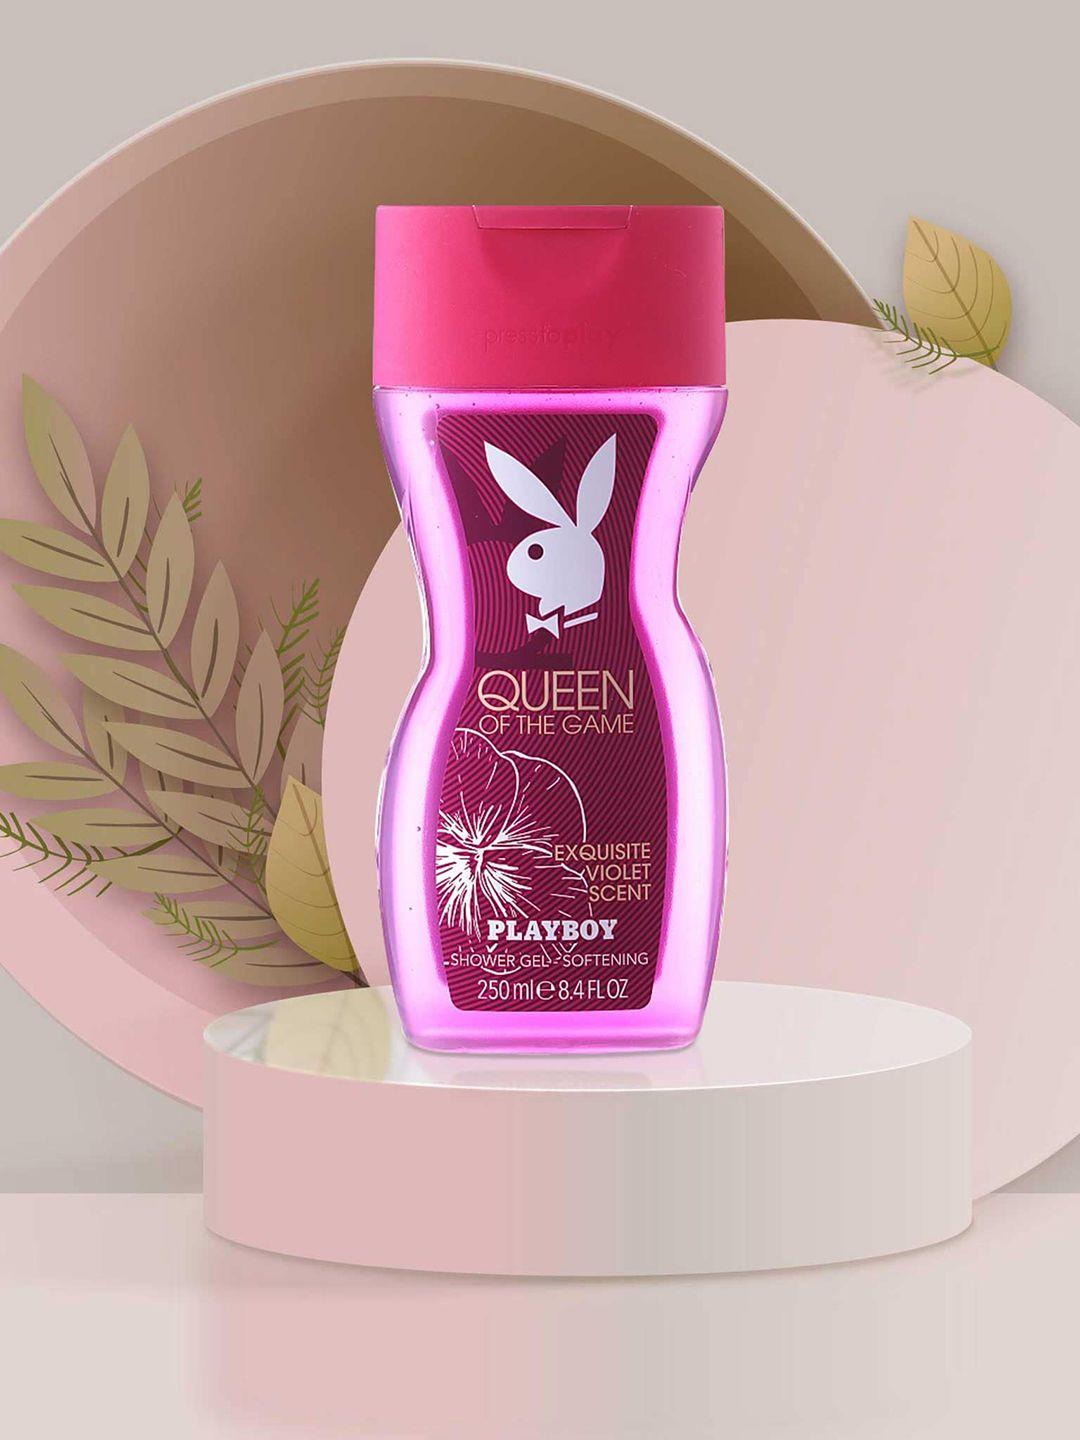 playboy queen of the game softening shower gel with exquisite violet scent - 250 ml